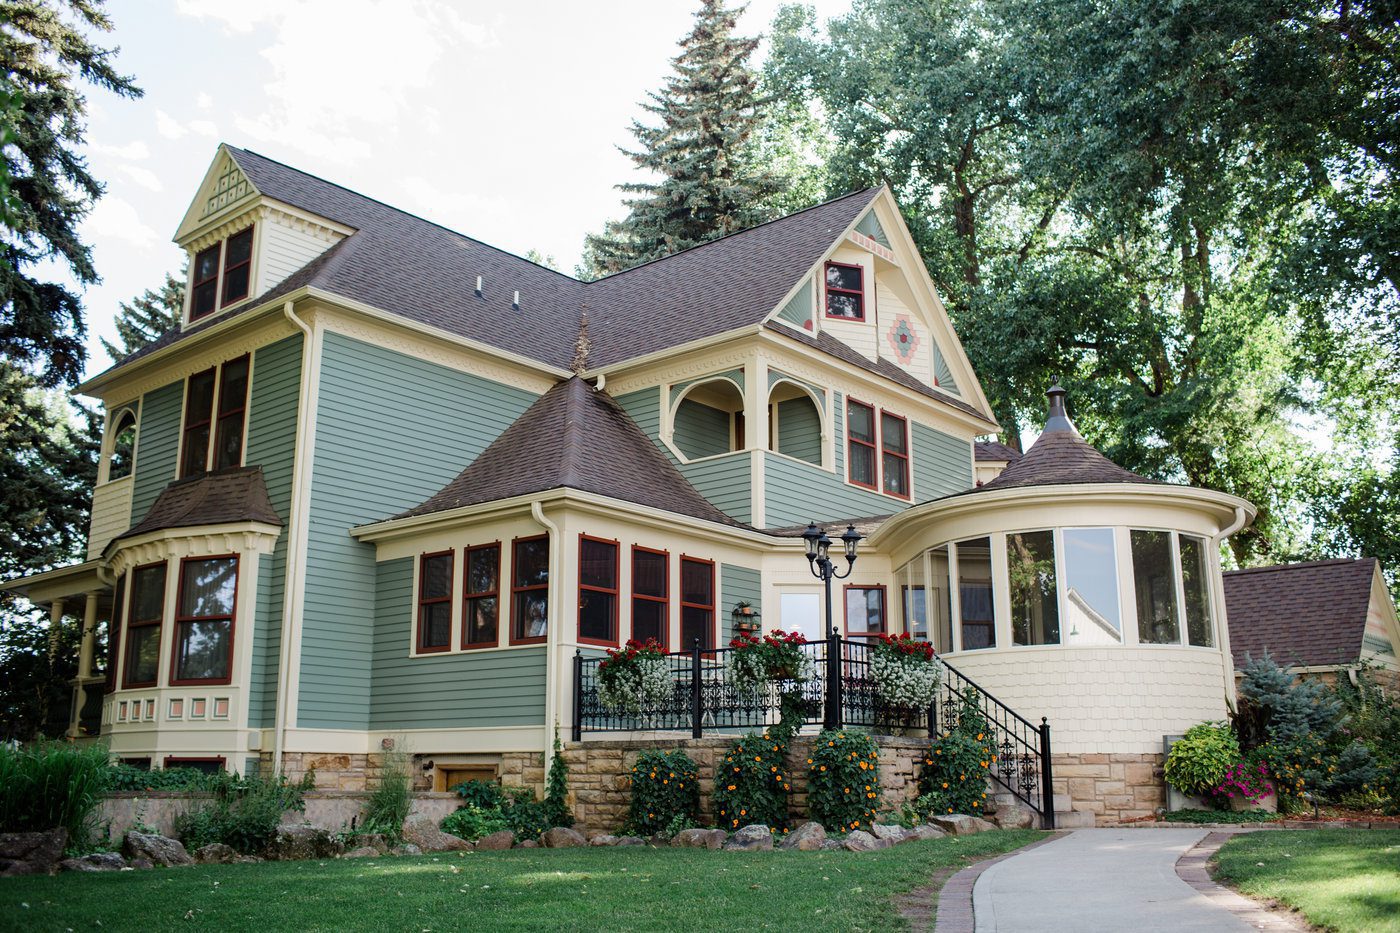 The Tapestry House in Fort Collins